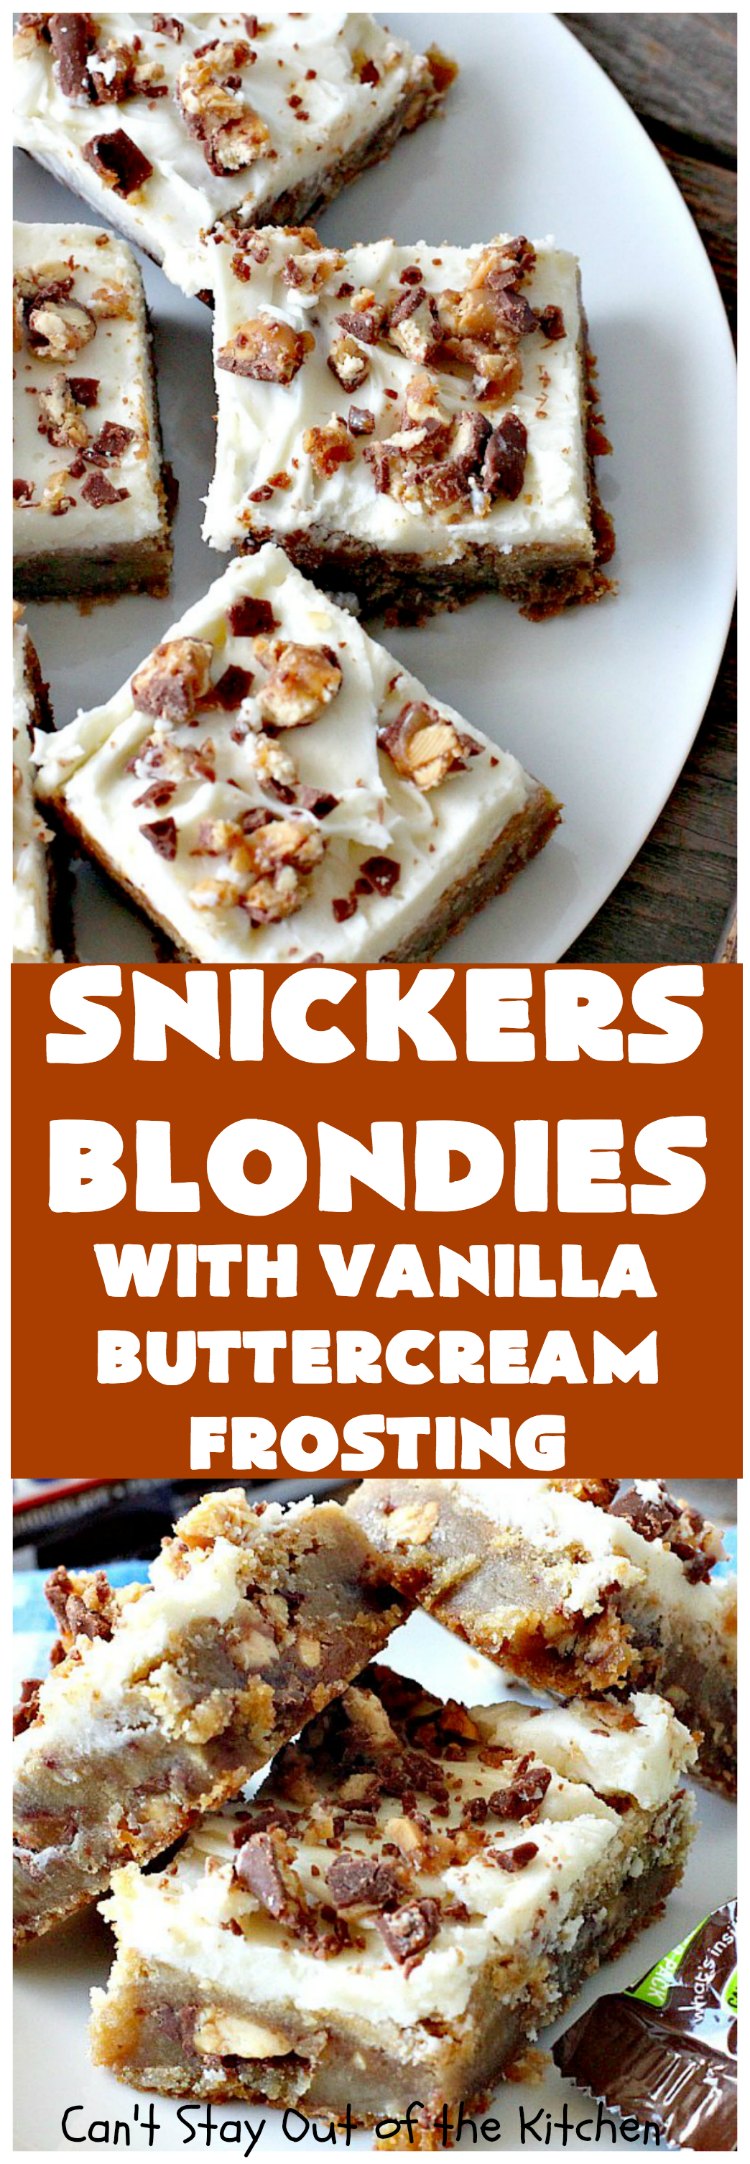 Snickers Blondies with Vanilla Buttercream Frosting | Can't Stay Out of the Kitchen